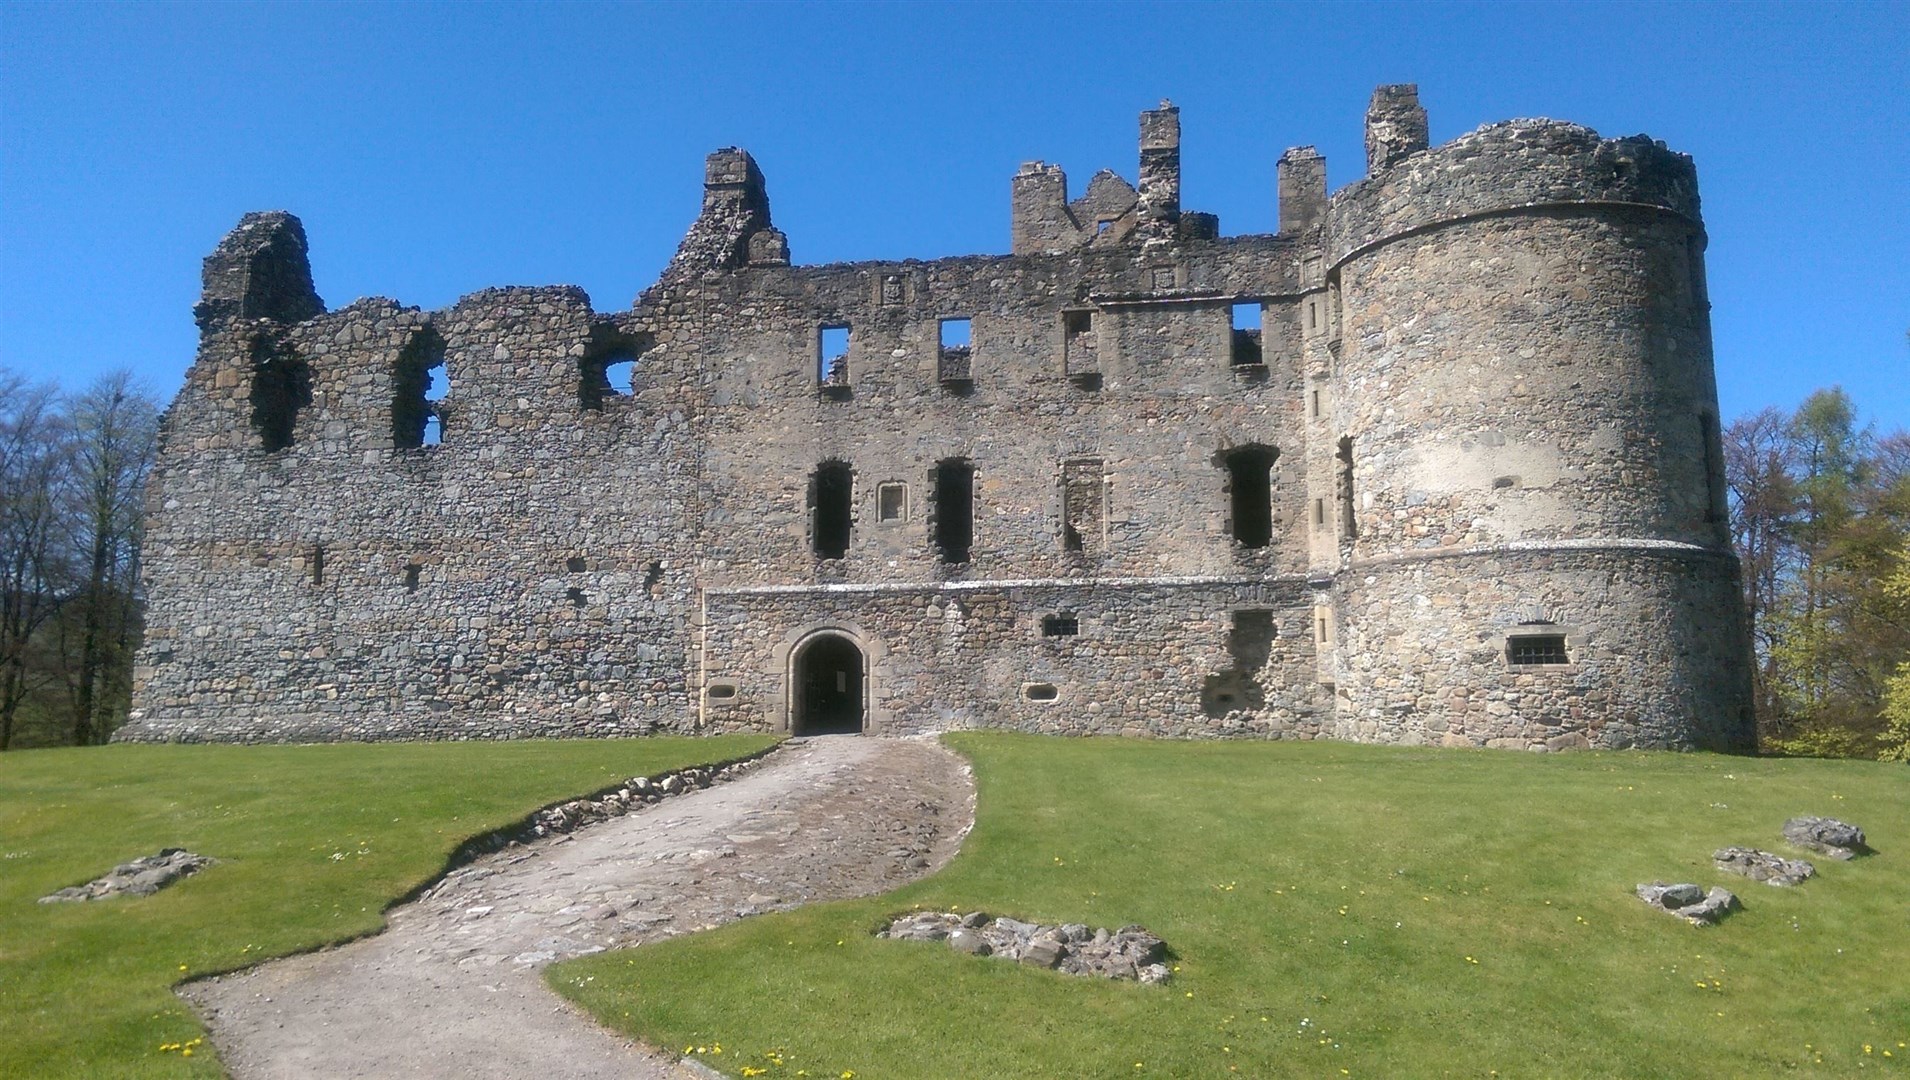 Built during the 1200s, the castle is one of the oldest strongholds in Scotland.